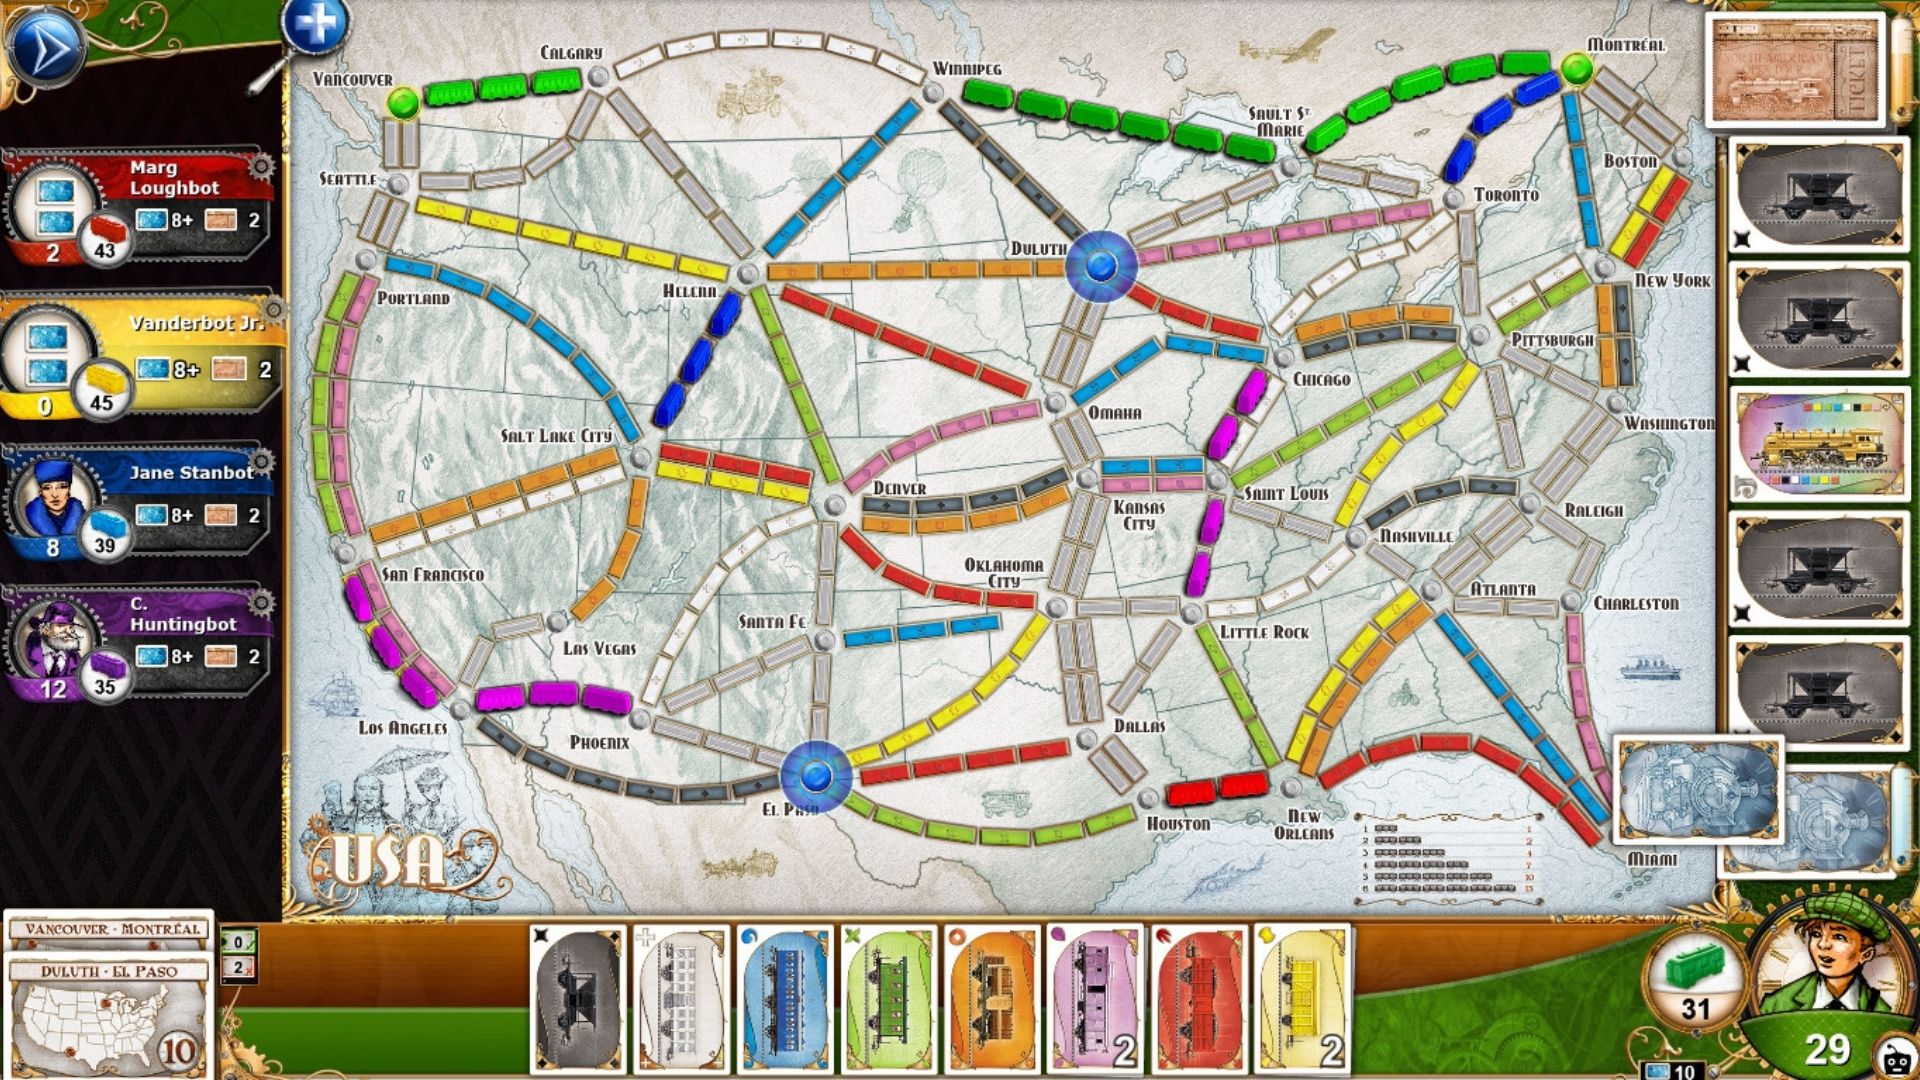 A screenshot from Ticket to Ride, a party game, showing a map with various colourful links drawn across it, depicting rail transportation.